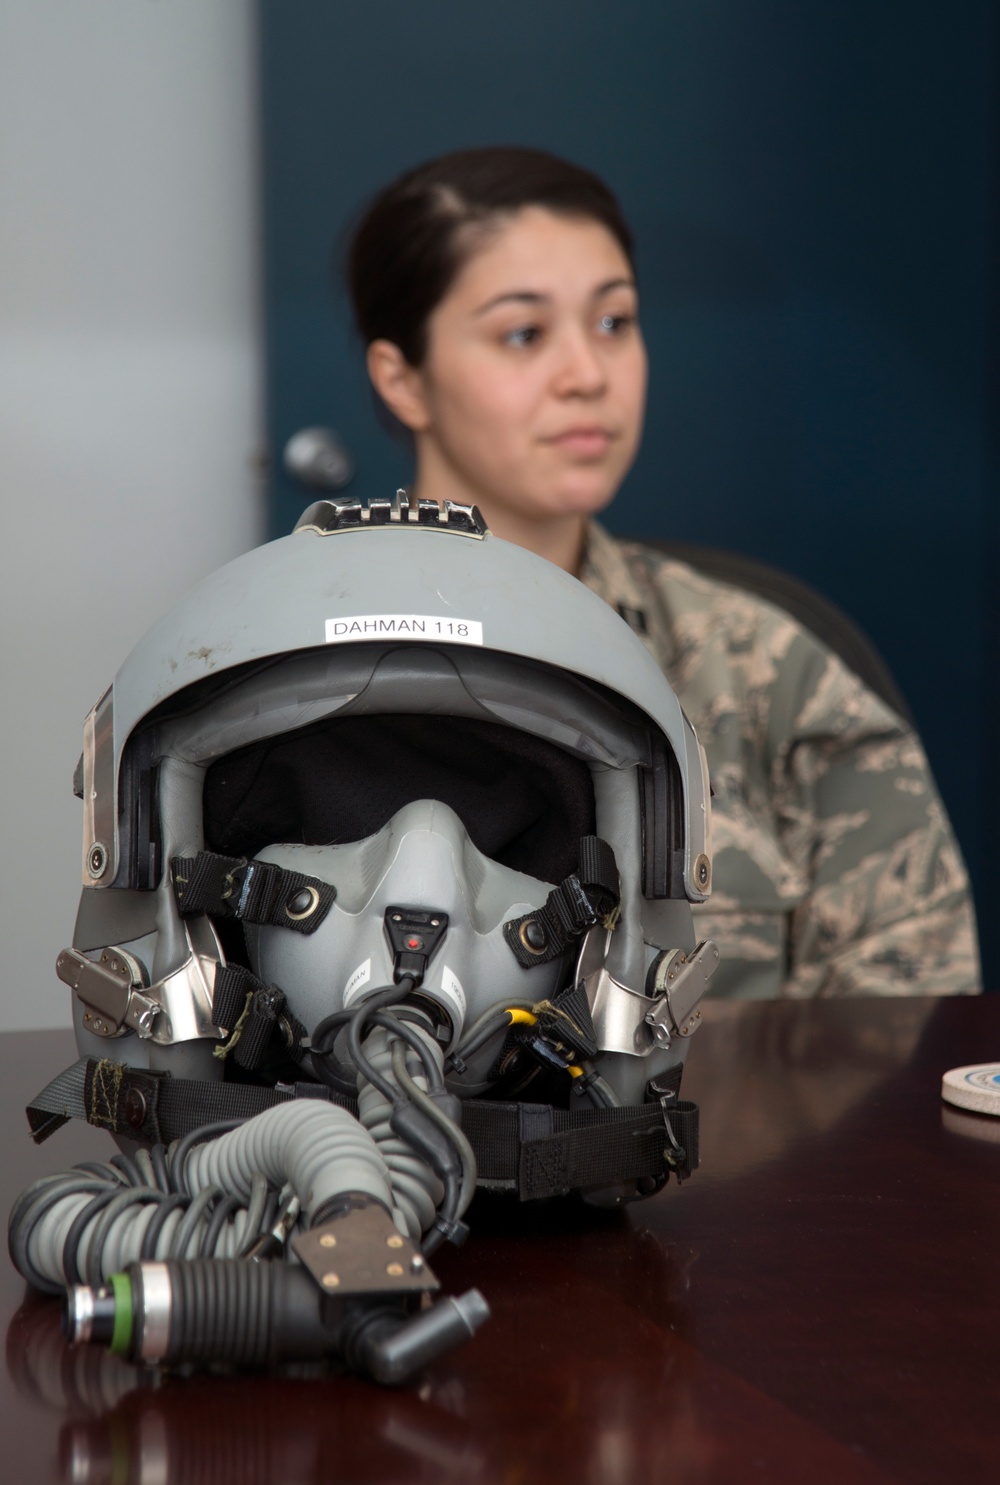 MacDill educates the future officers of the Air Force